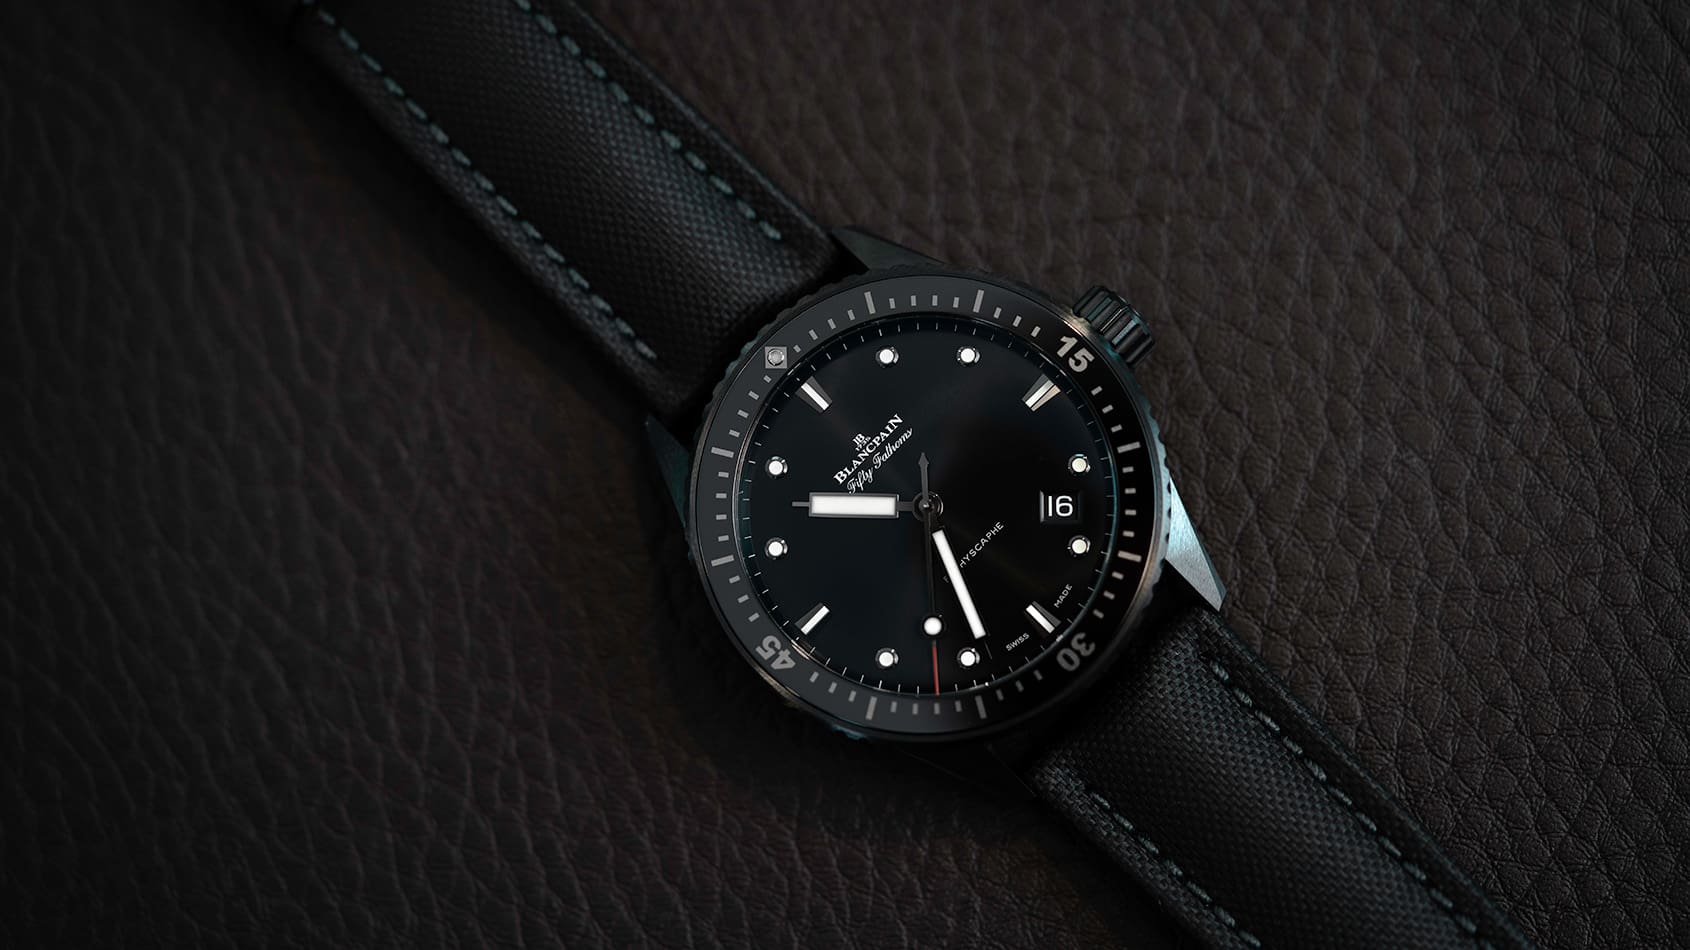 The inky depths of the Blancpain Fifty Fathoms Bathyscaphe in black ceramic 